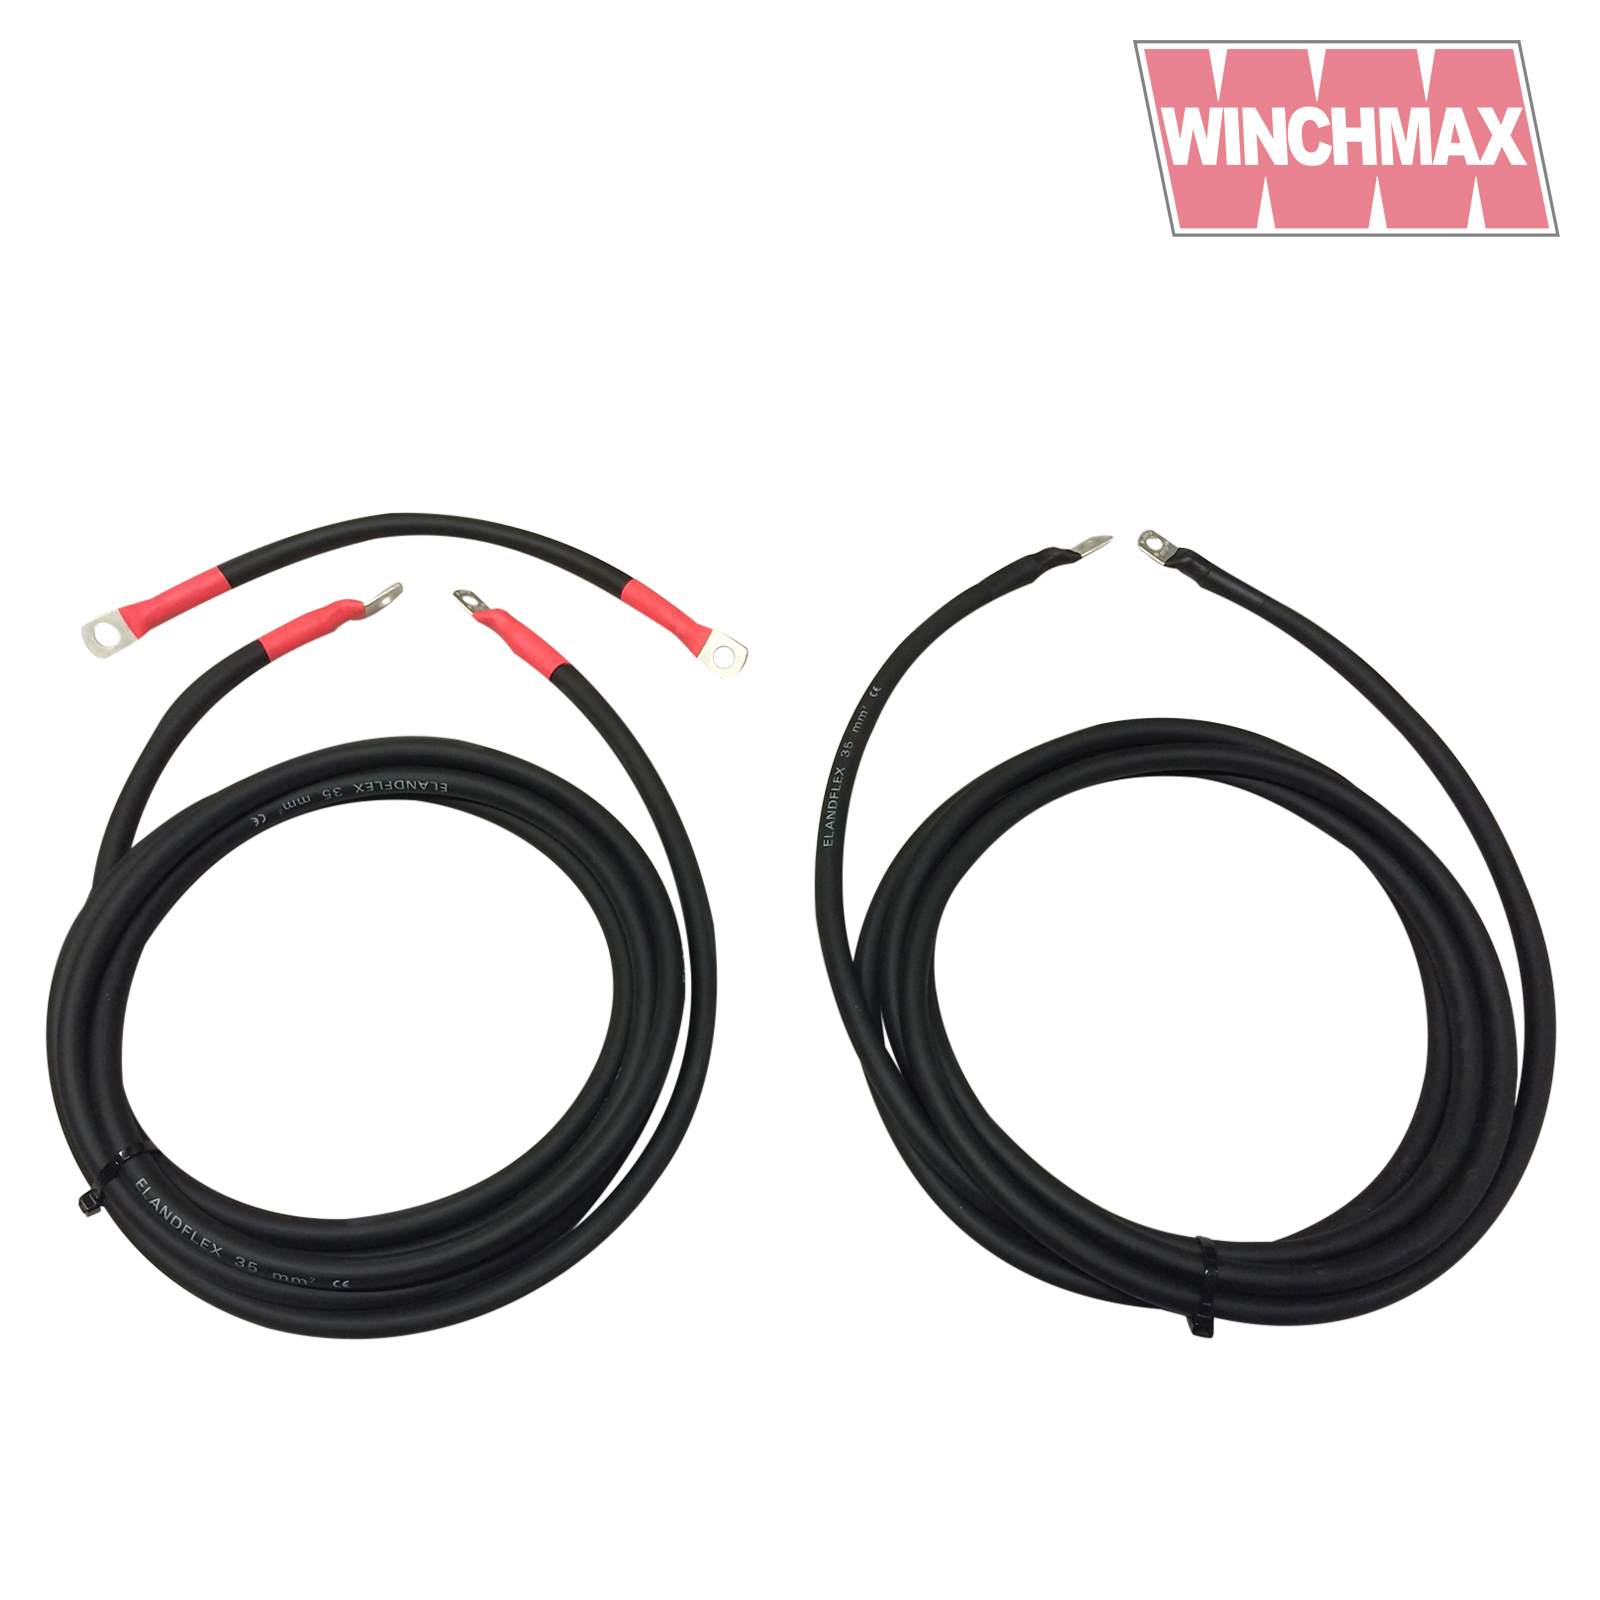 Winchmax defender battery leads